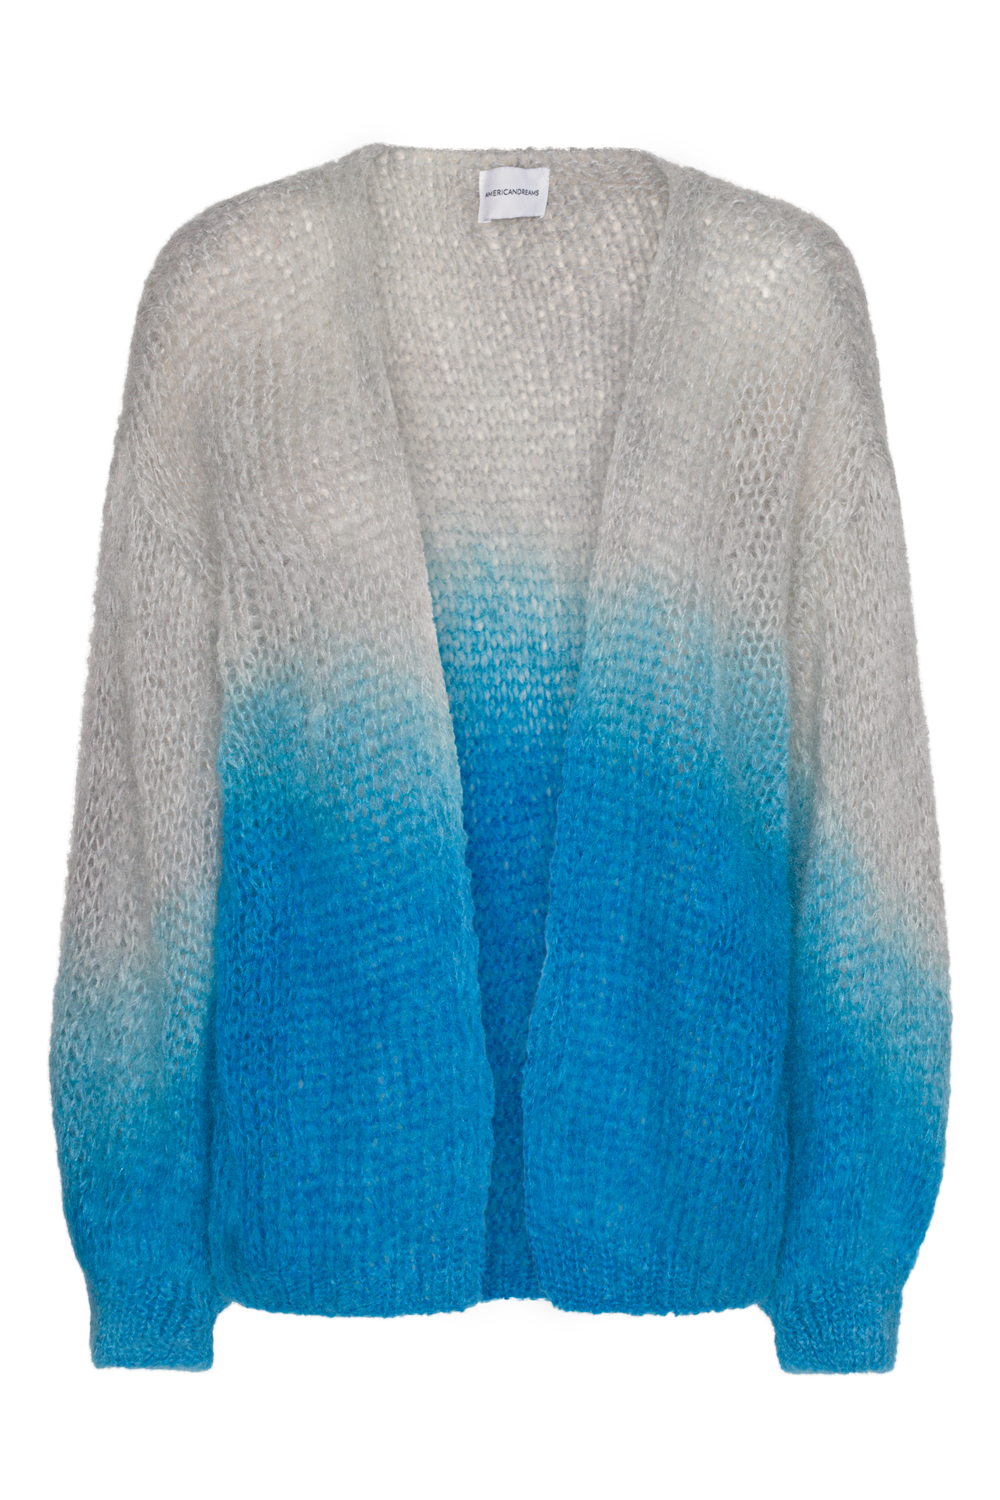 Olivia Mohair Cardigan Ombre Turquoise/Grey - Sample